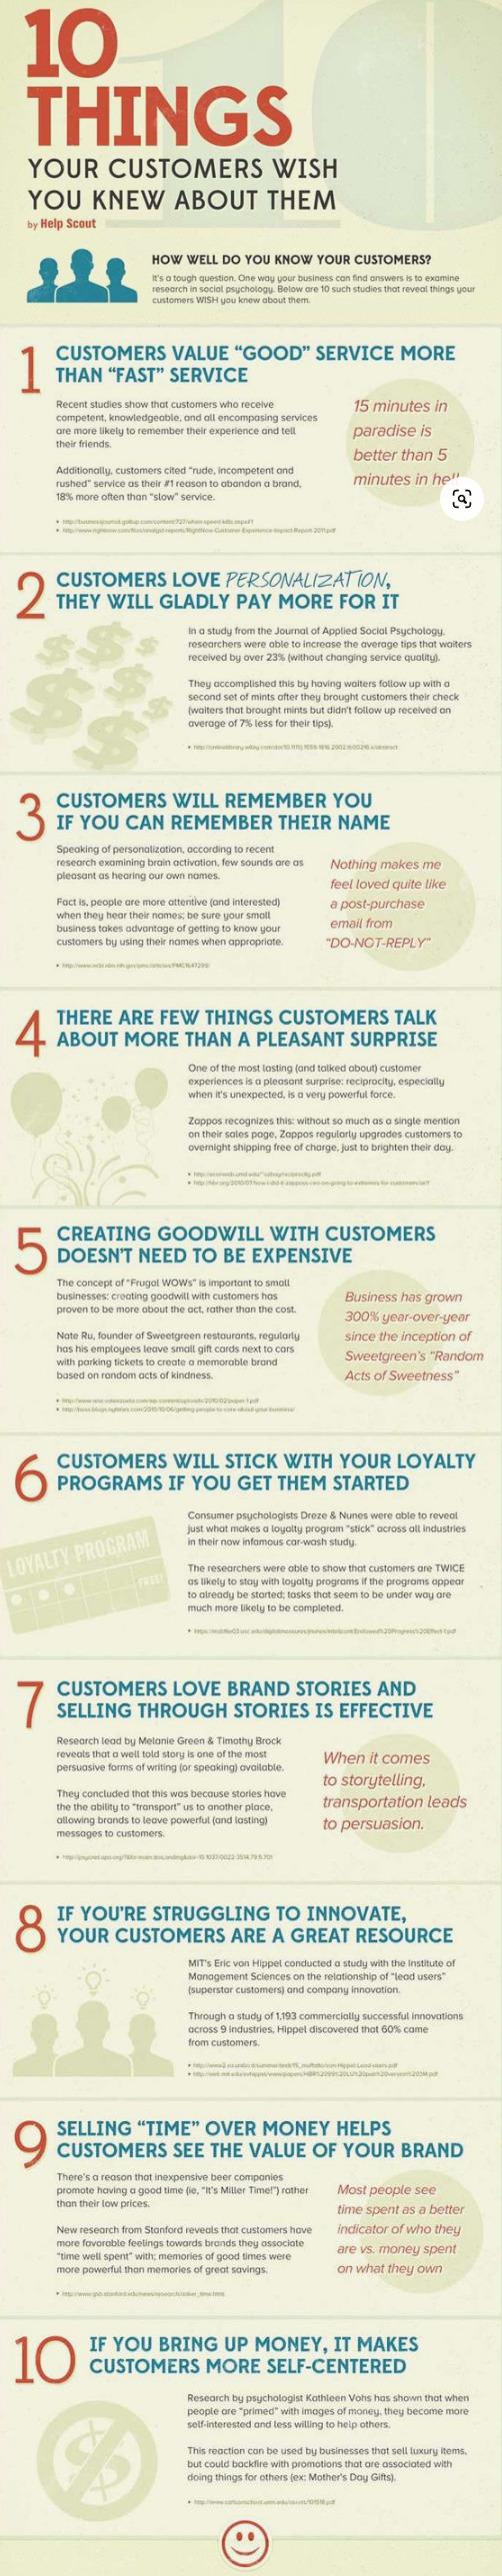 10 Things your customer think you should know about them